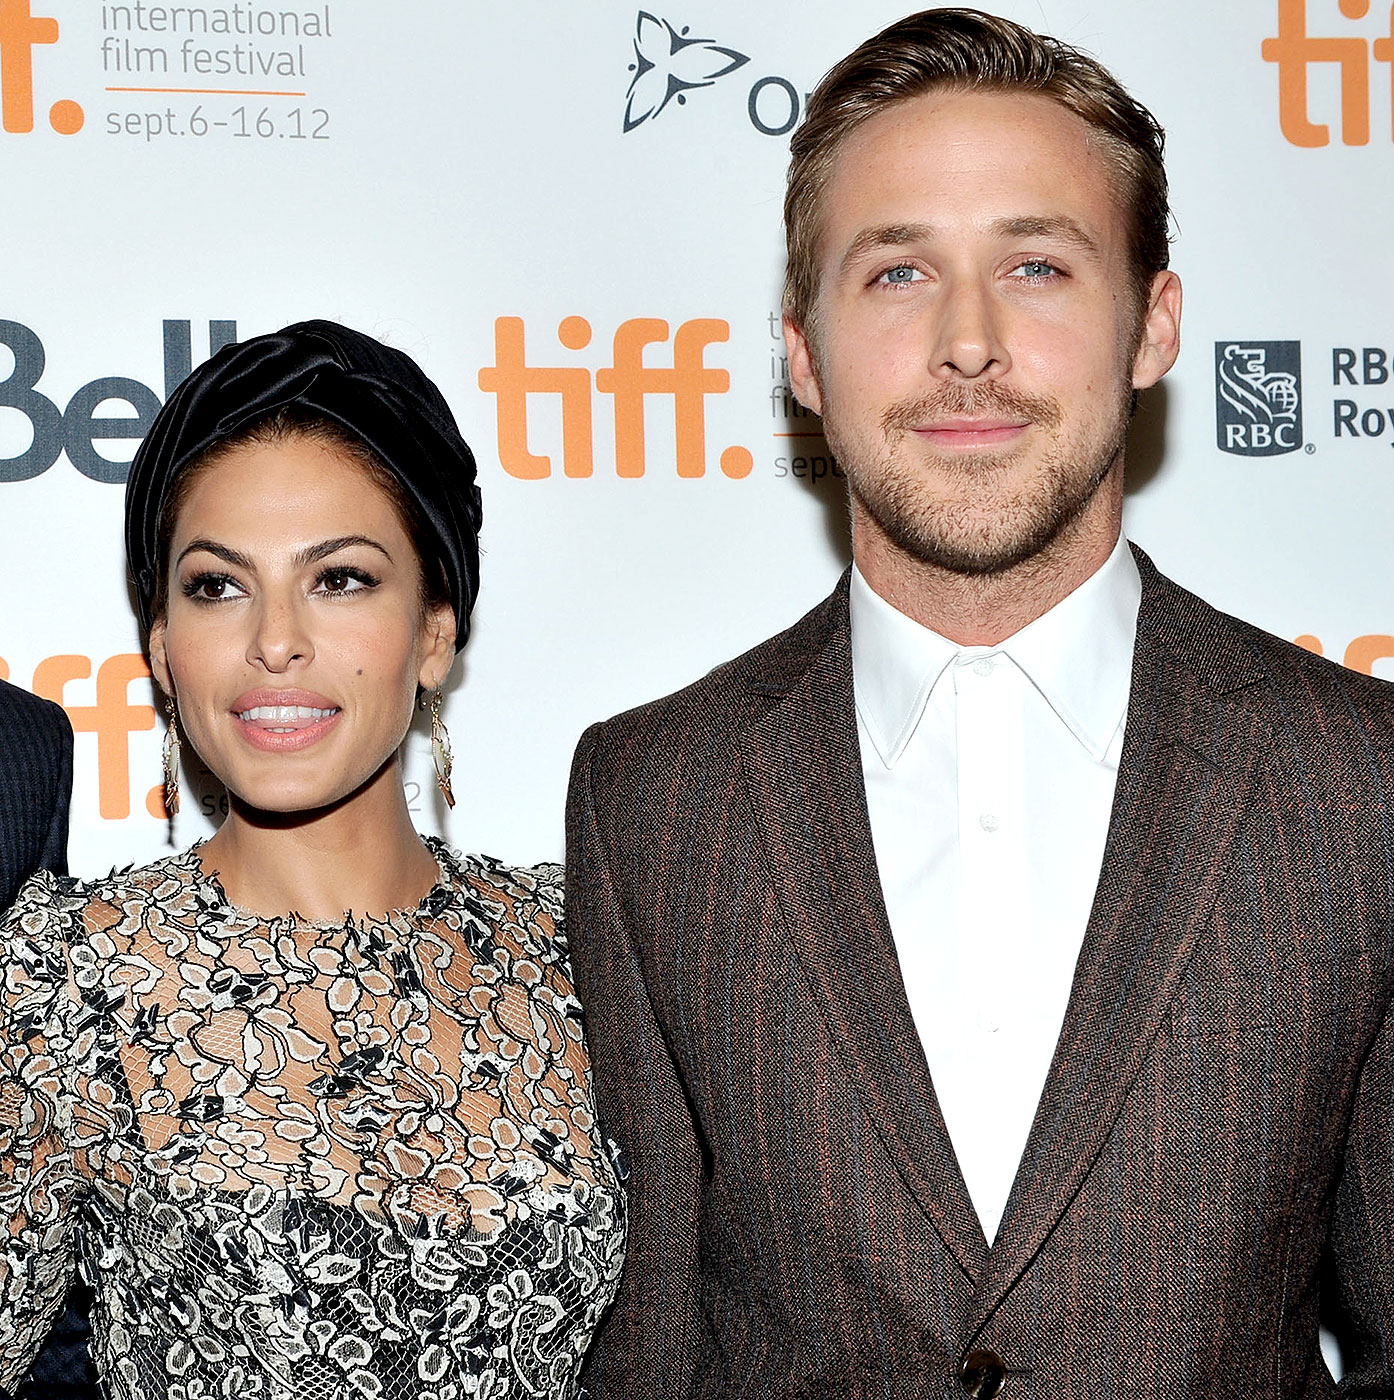 Eva Mendes is pregnant and she is expecting baby with her Boyfriend Ryan Gosling. Congrats Eva!